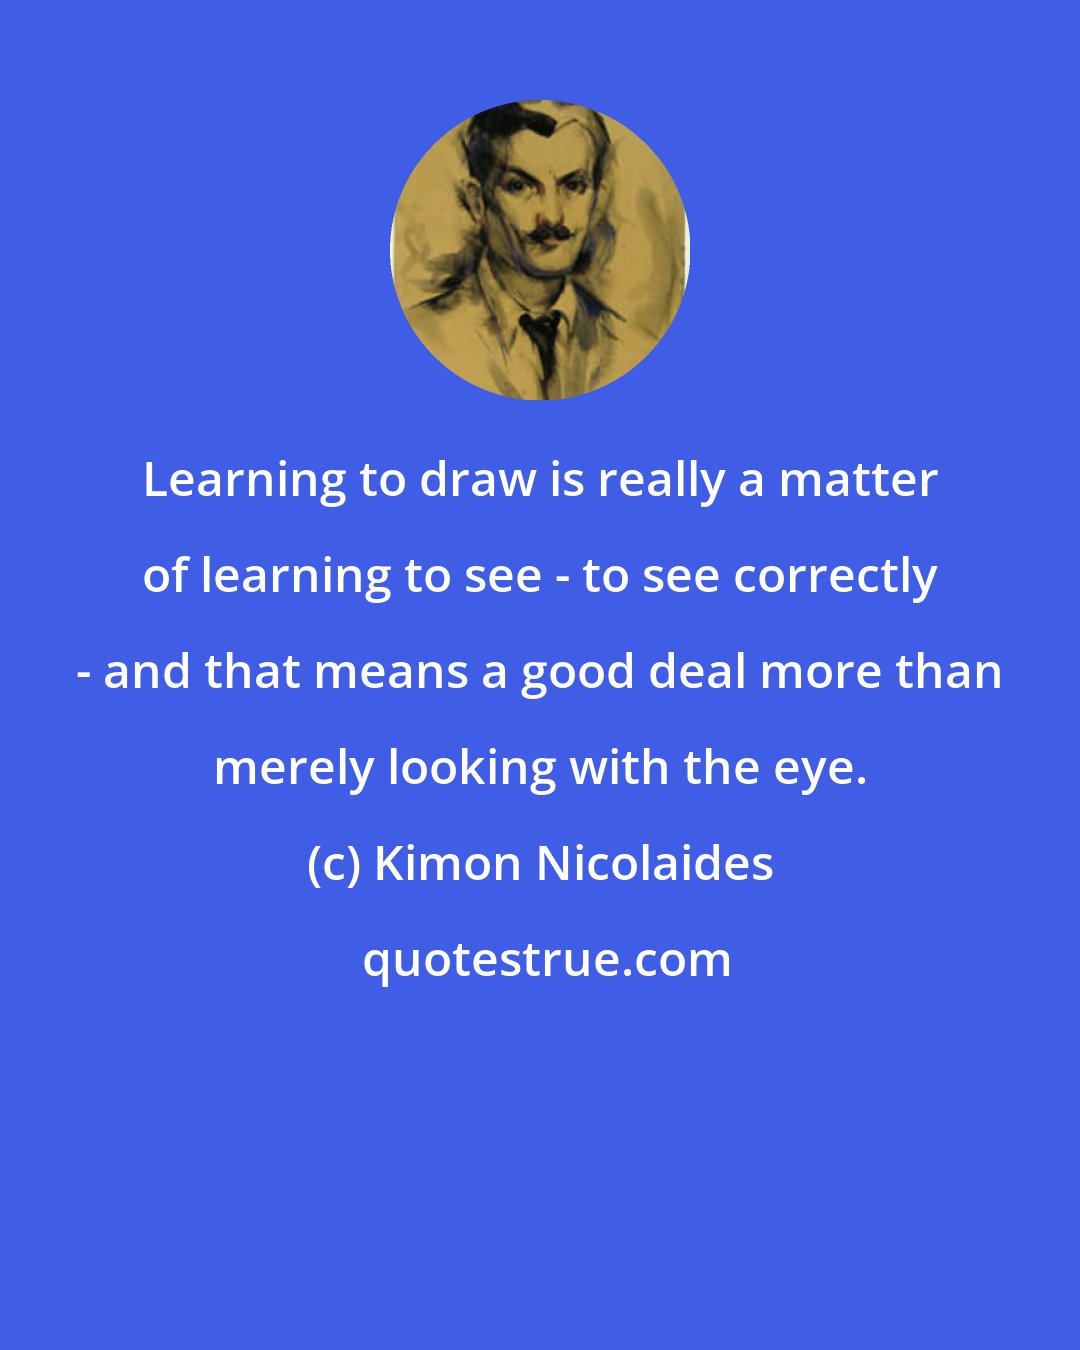 Kimon Nicolaides: Learning to draw is really a matter of learning to see - to see correctly - and that means a good deal more than merely looking with the eye.